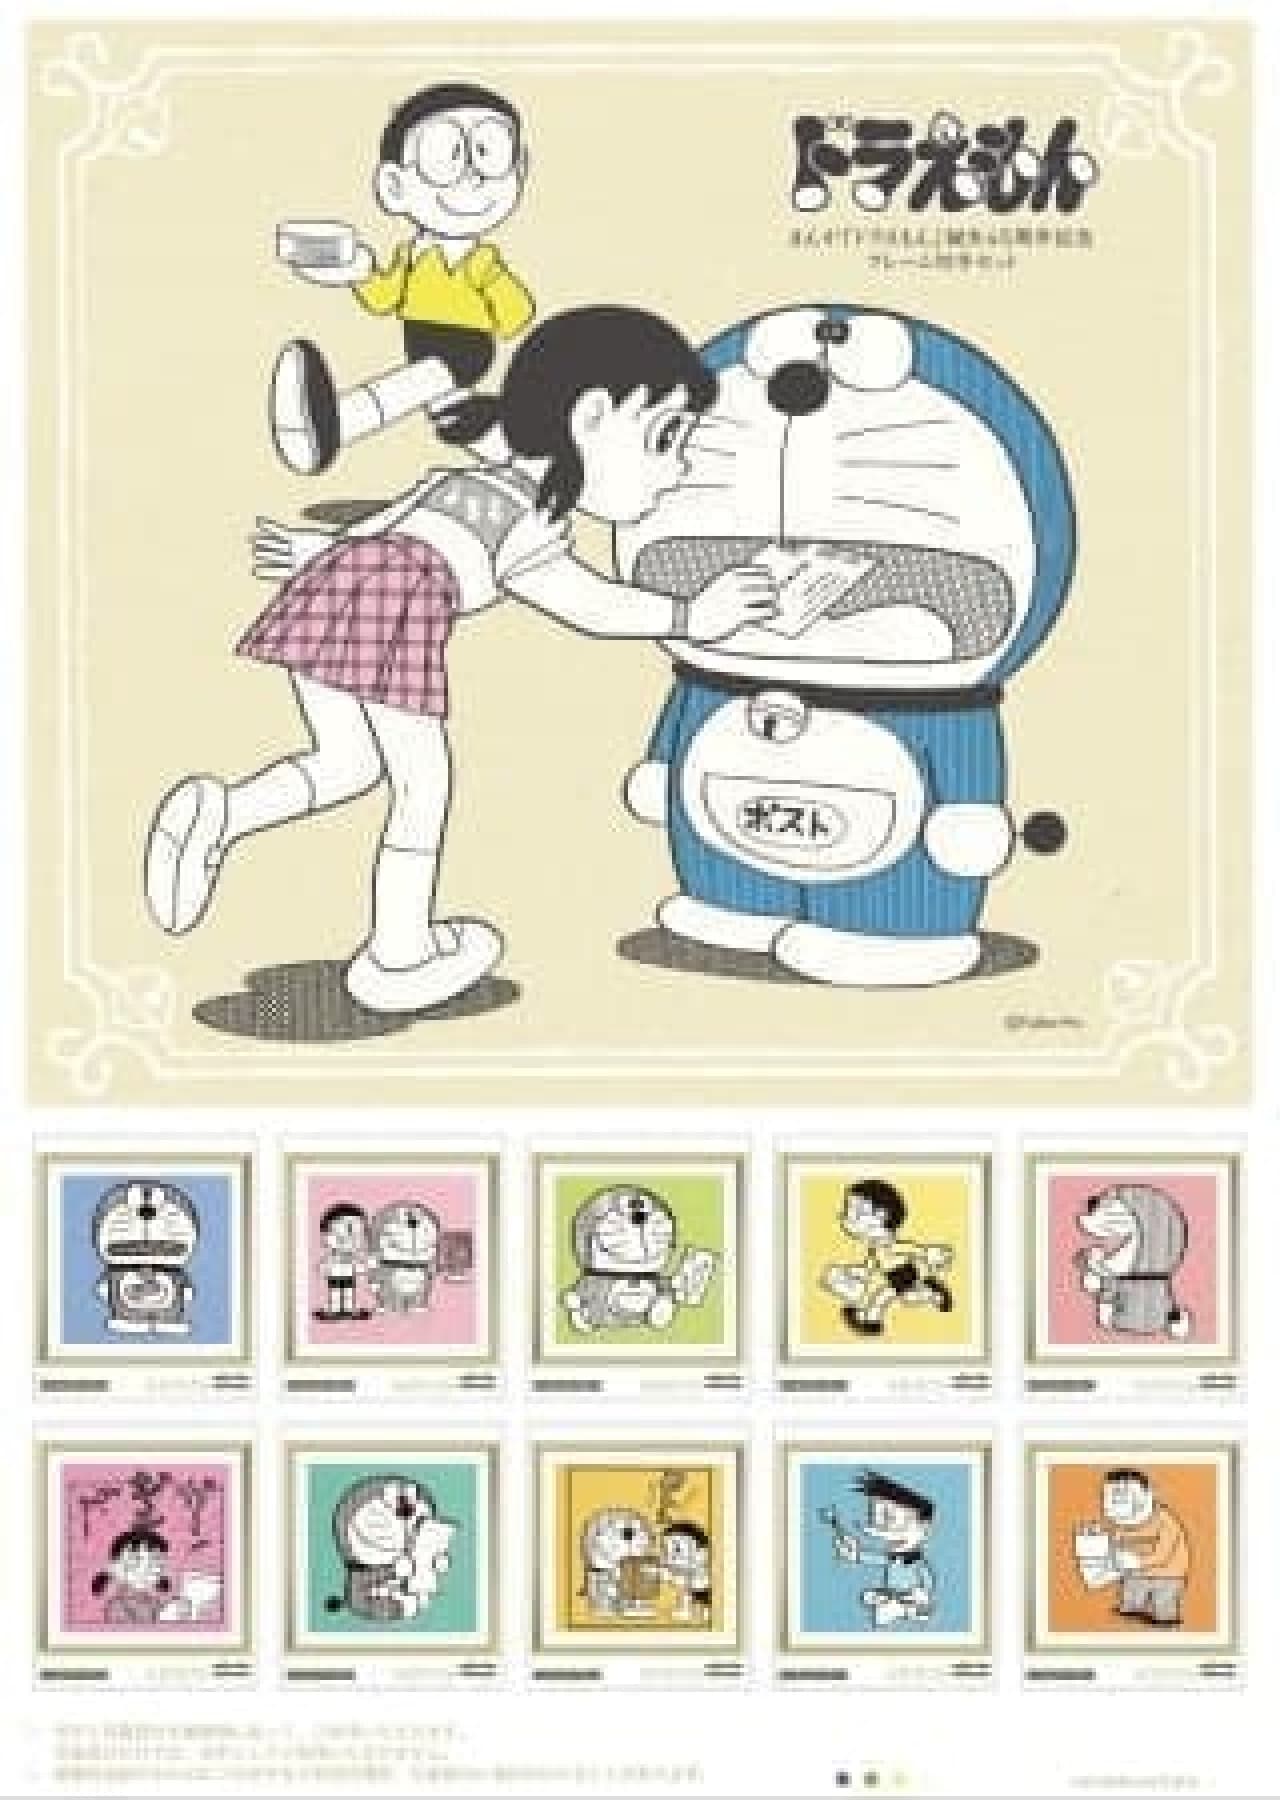 The original illustration of the letter is on the stamp (c) Fujiko Pro